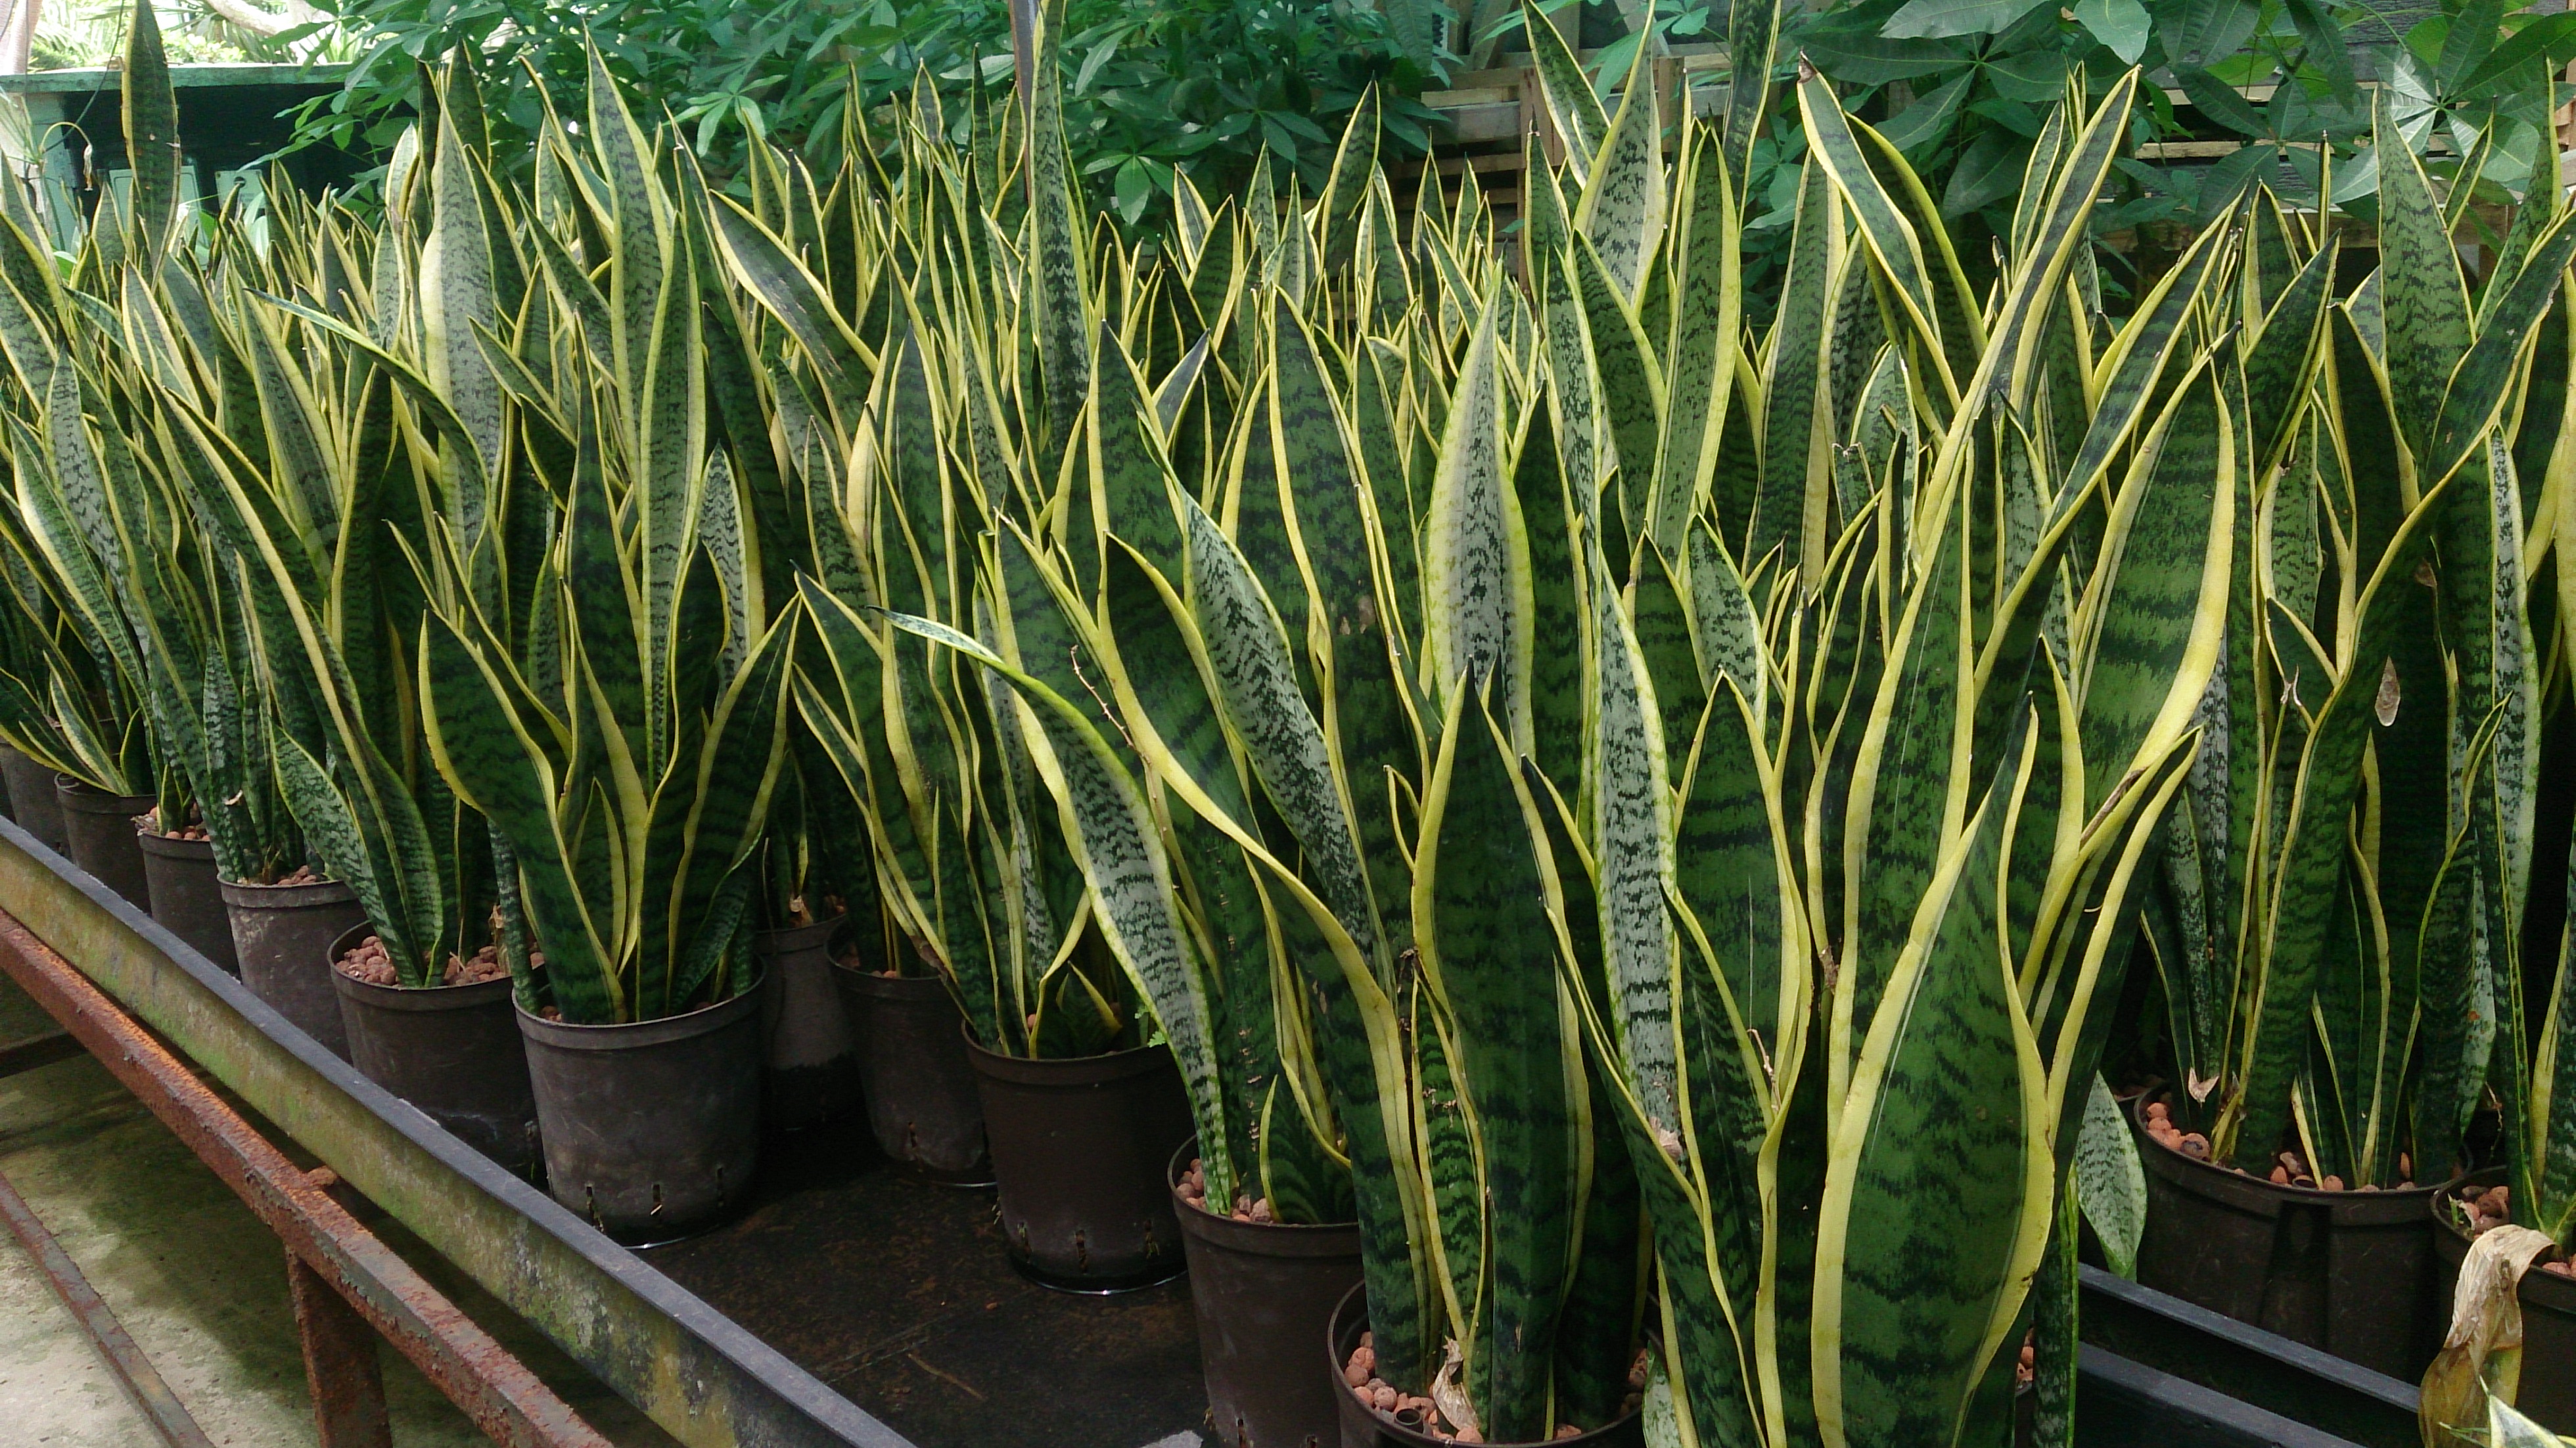 A nursery display of dozens of snake plants in pots and containers with its large high leave